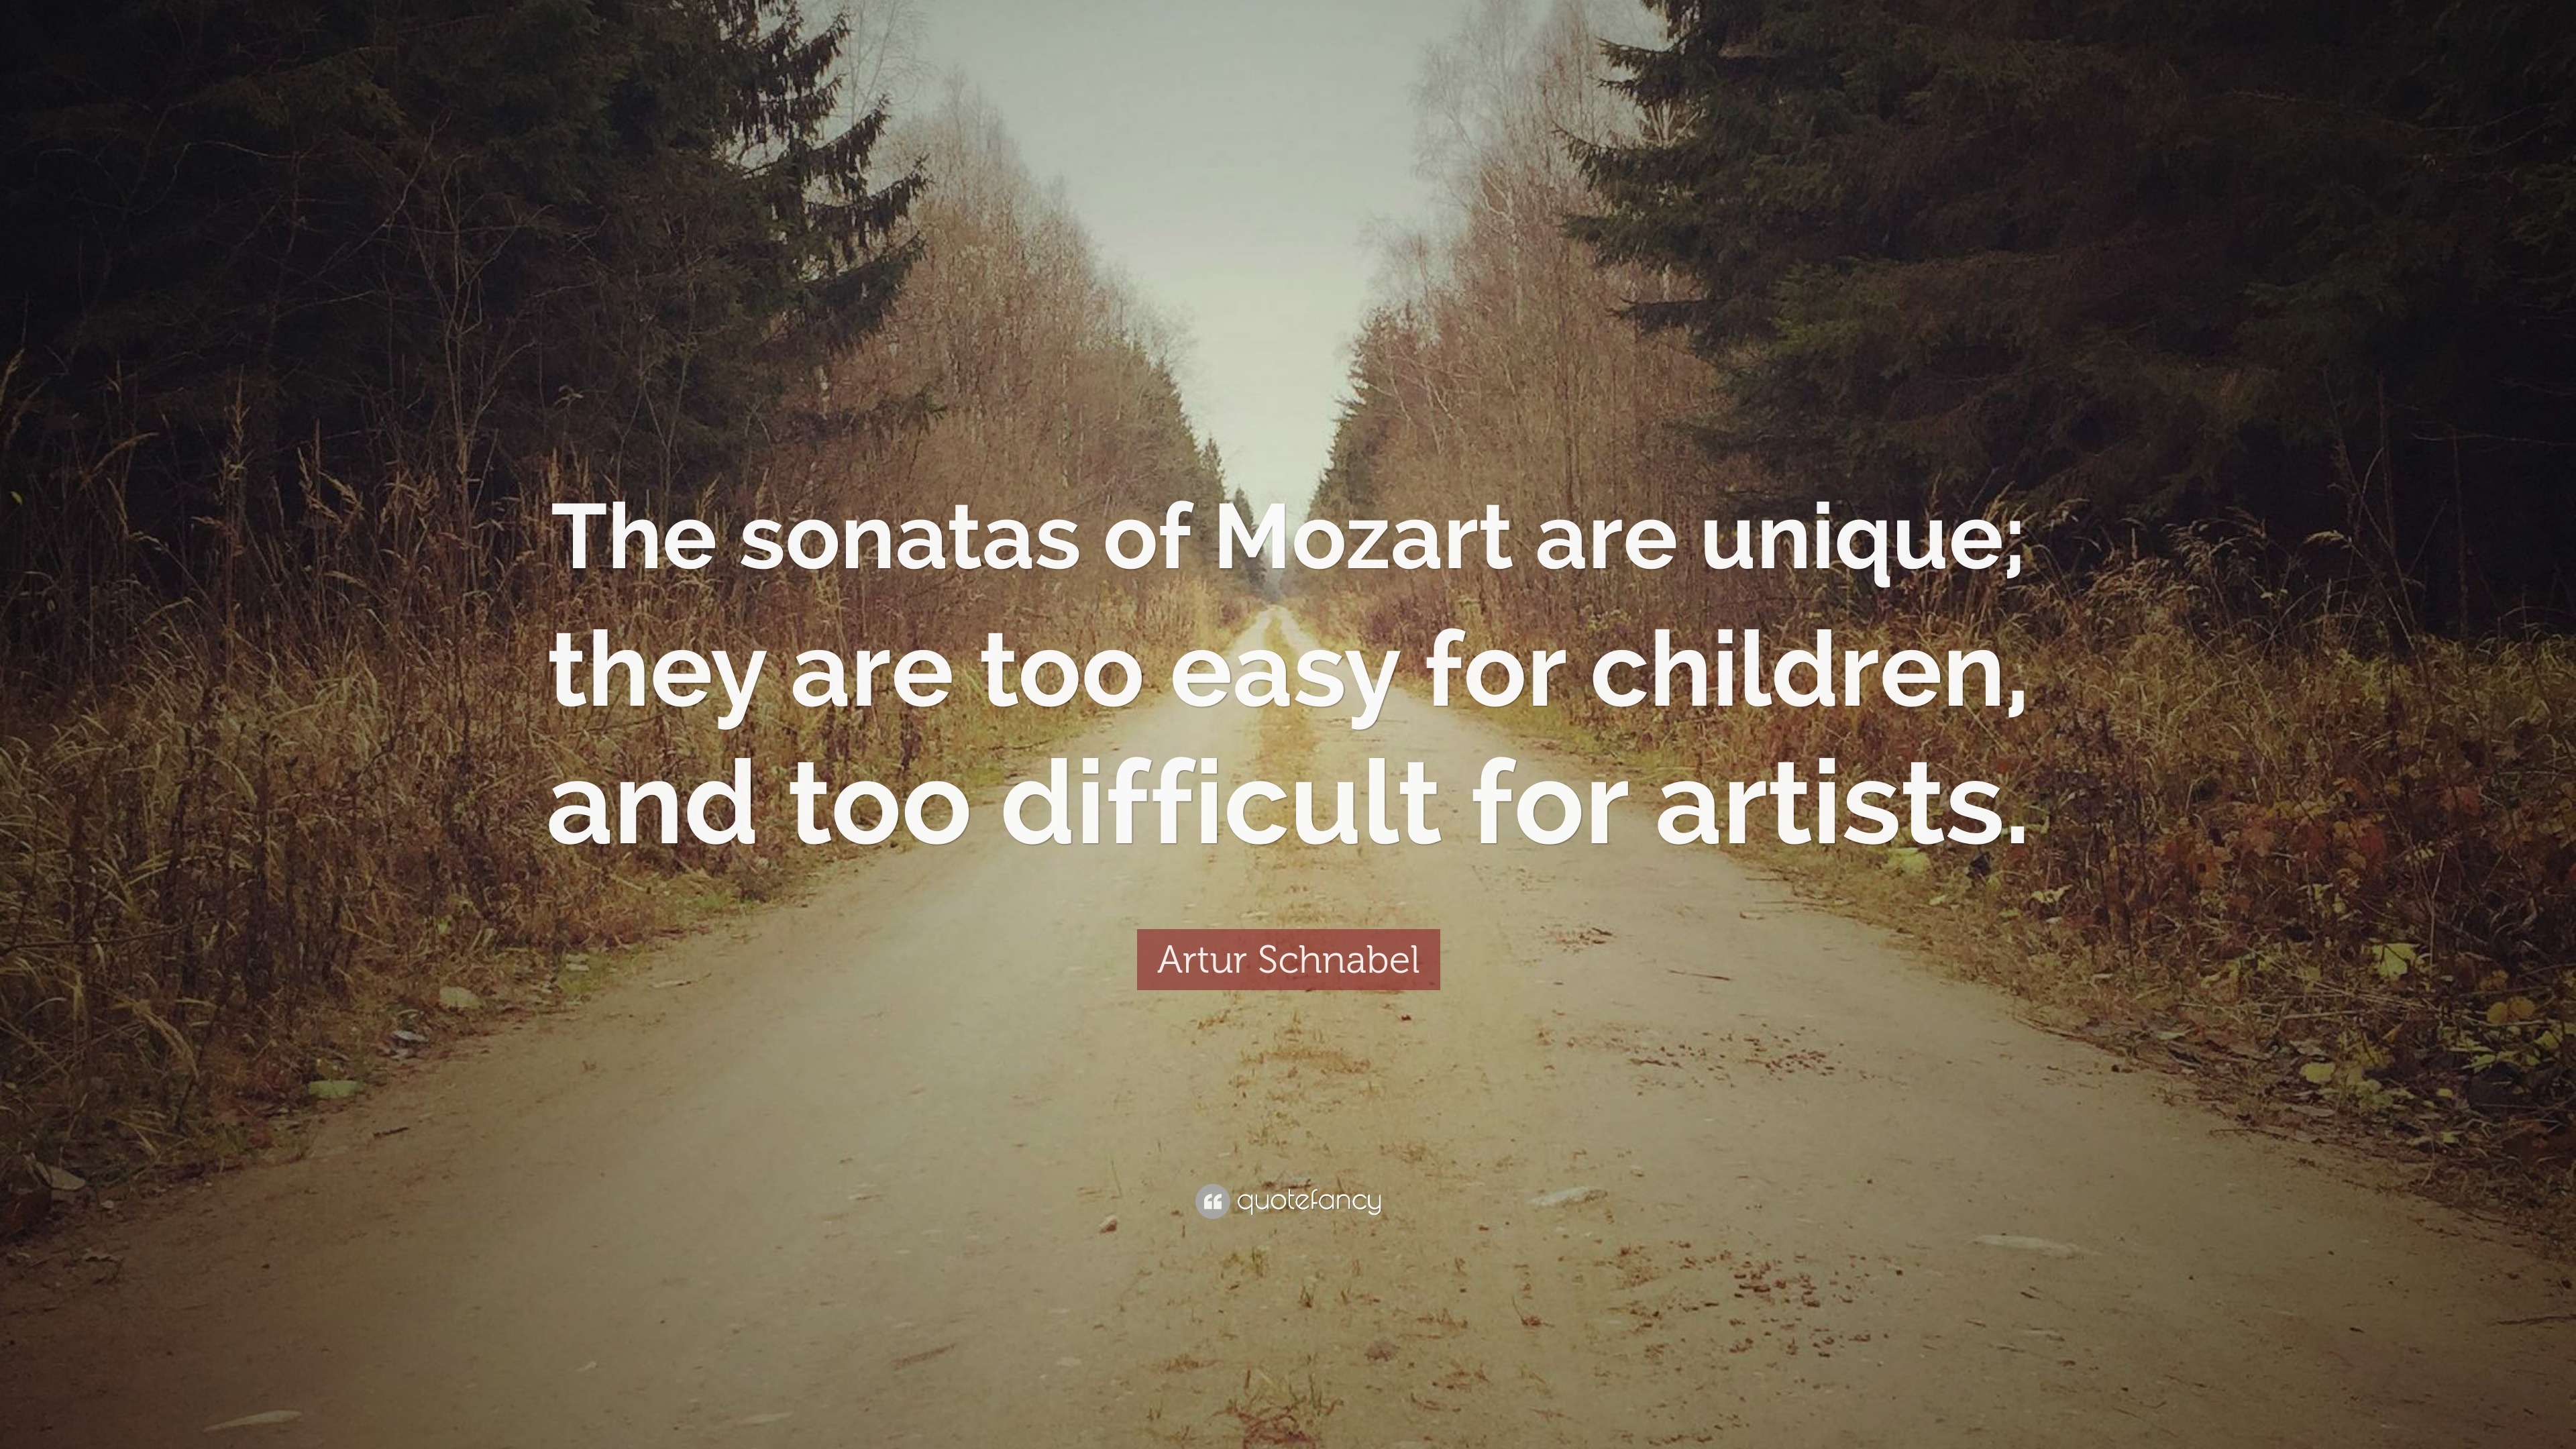 Artur Schnabel Quote: “The sonatas of Mozart are unique; they are too ...